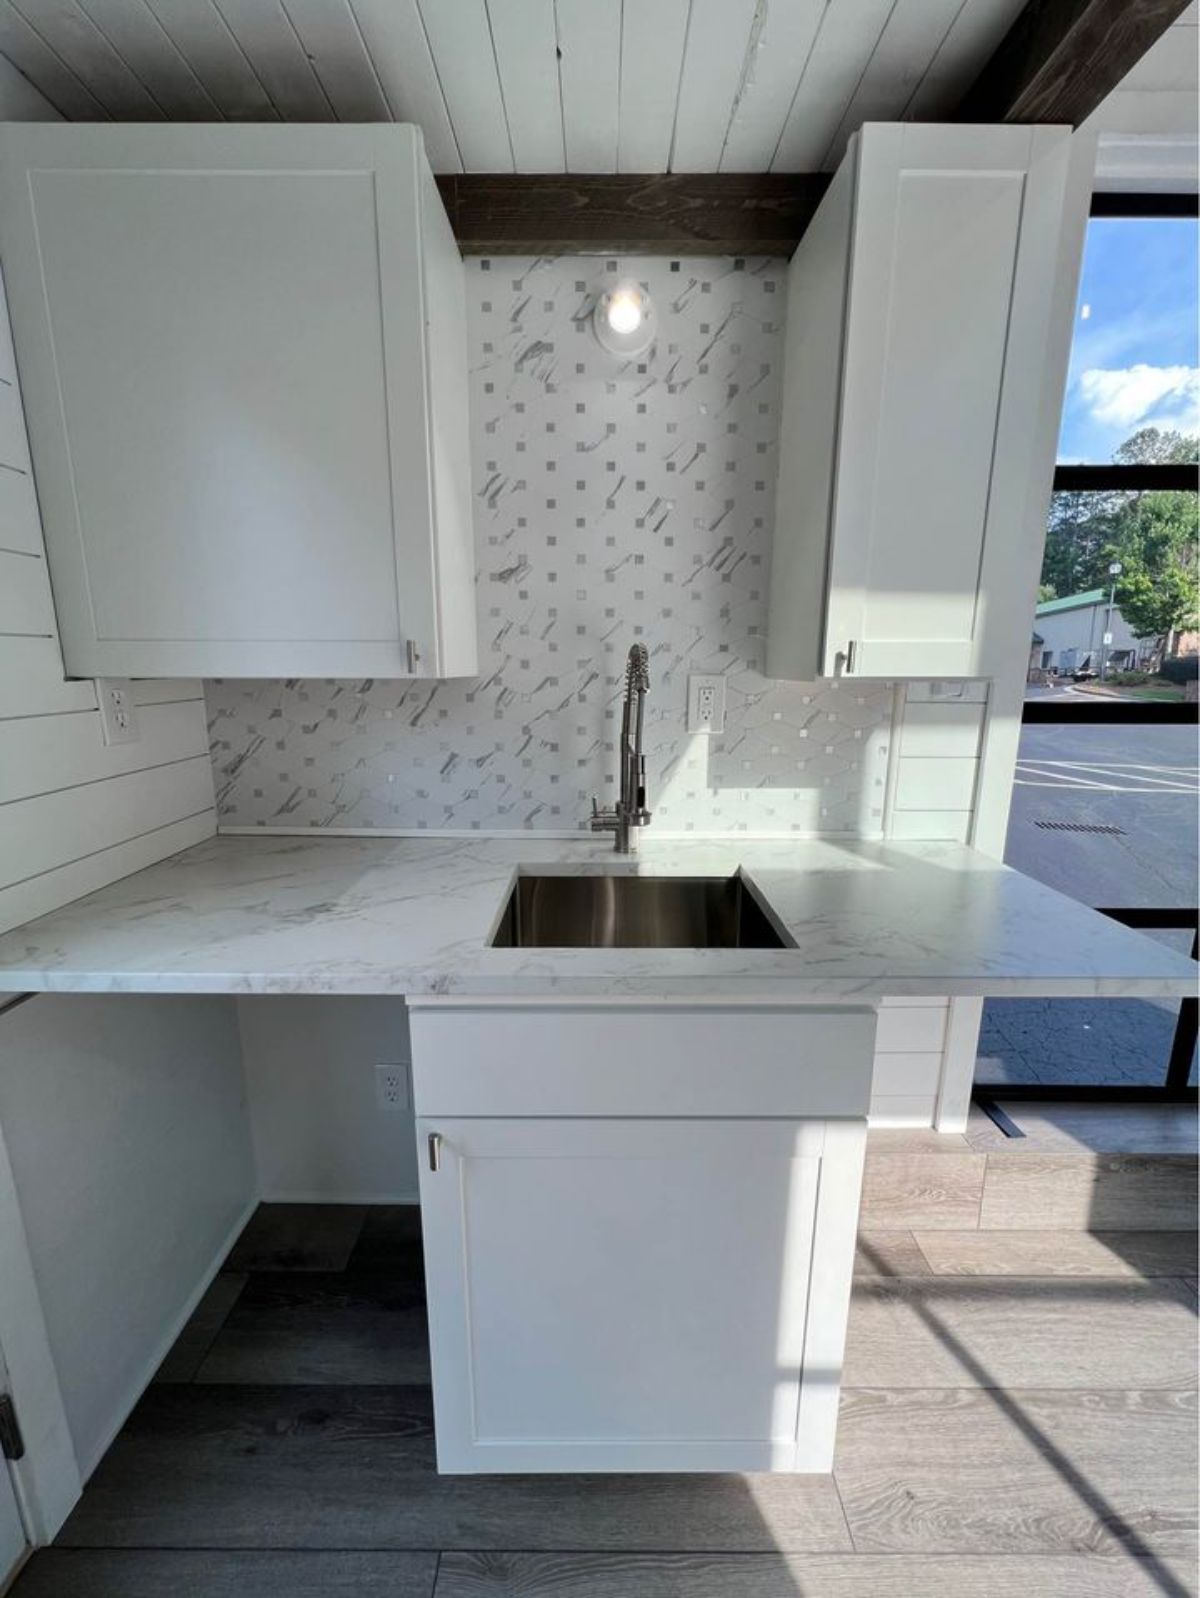 Countertop and sink with storage on other side which can be used as dining area too